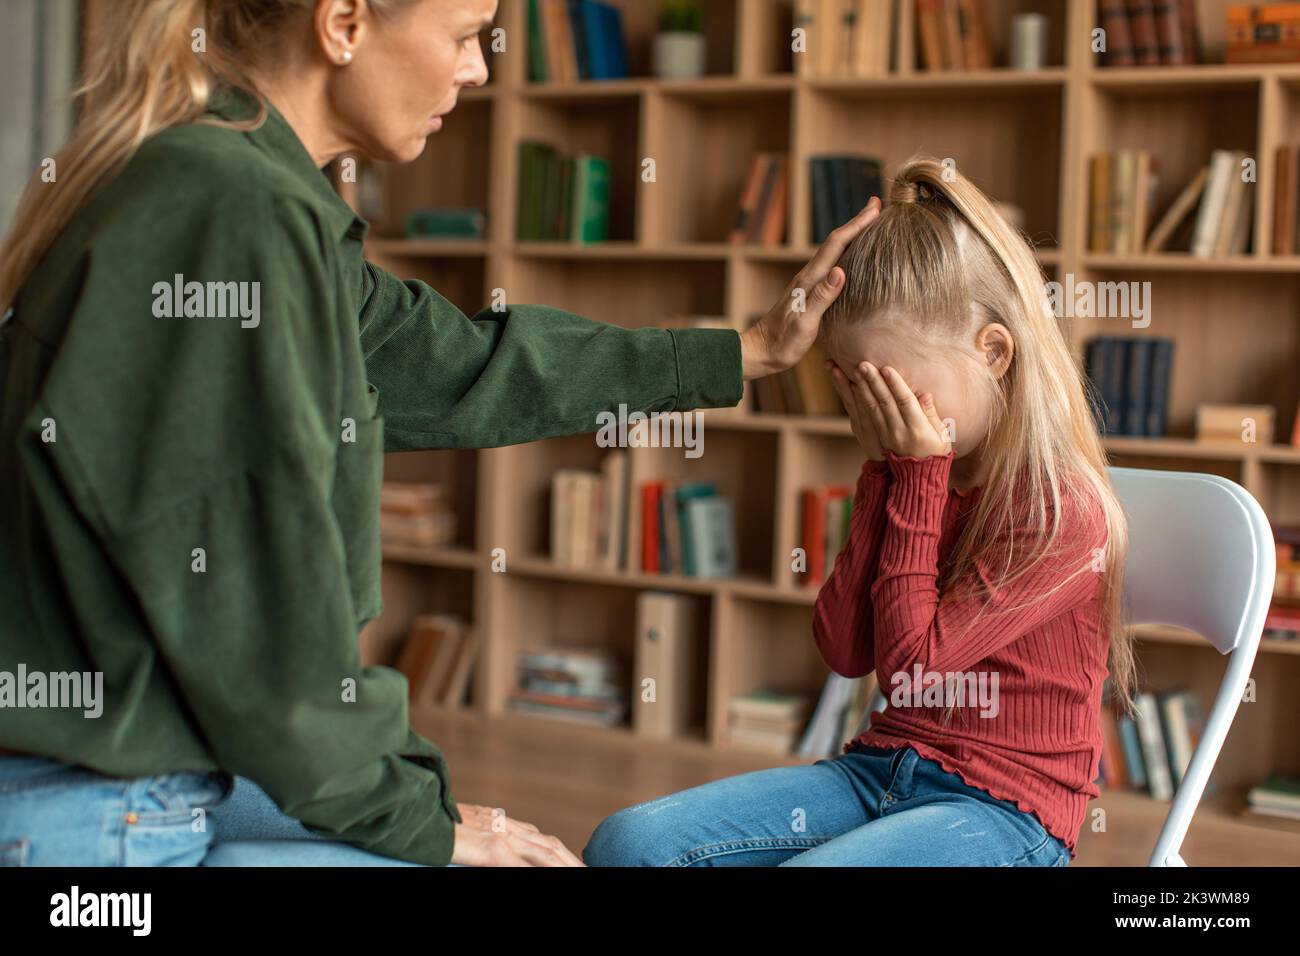 Little scared girl hiding face behind hands, ignoring caring female psychologist during personal consultation at office Stock Photo